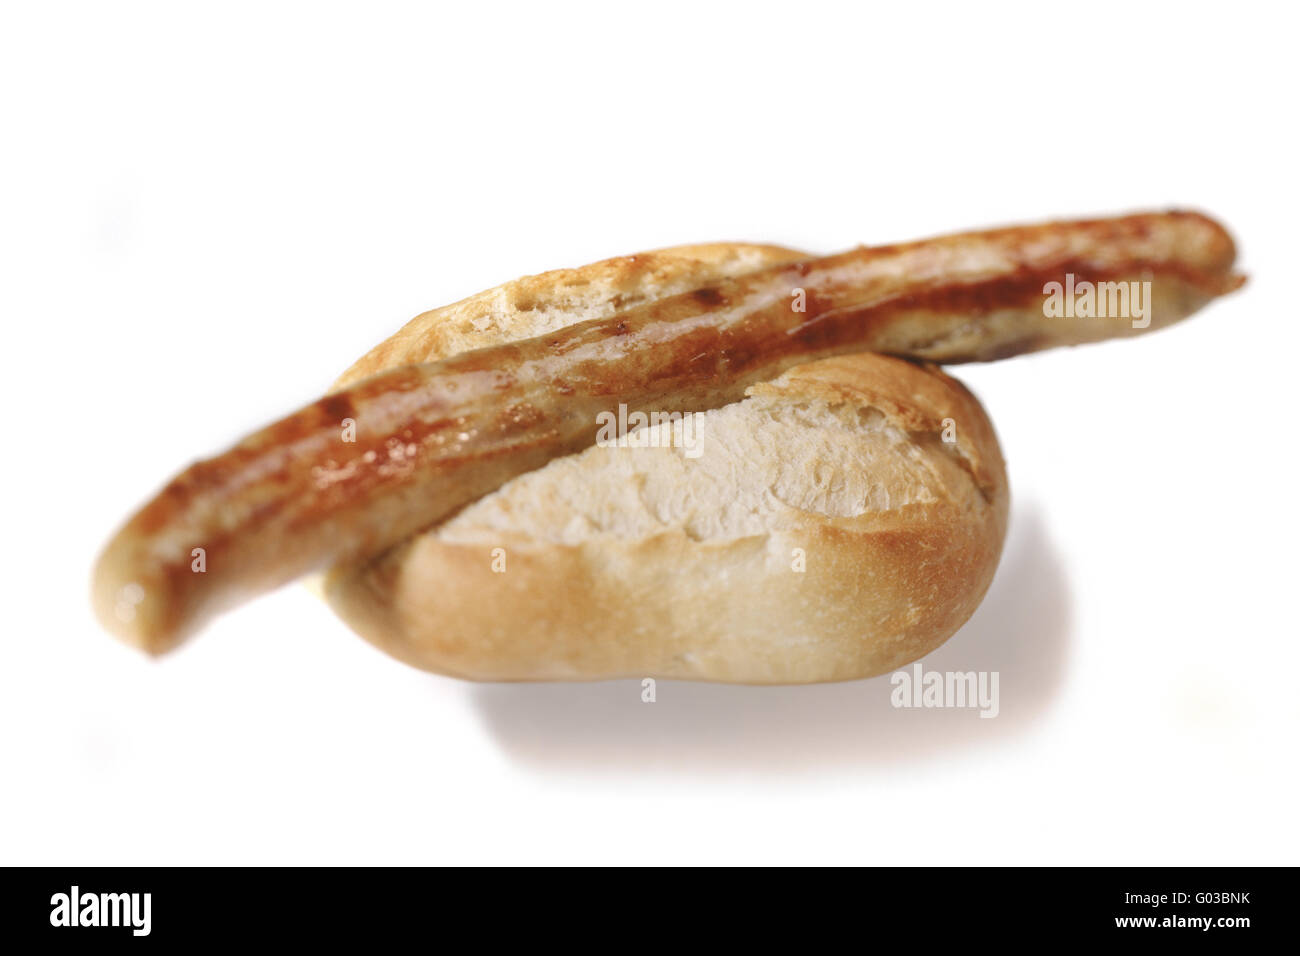 sausage with german bread Stock Photo